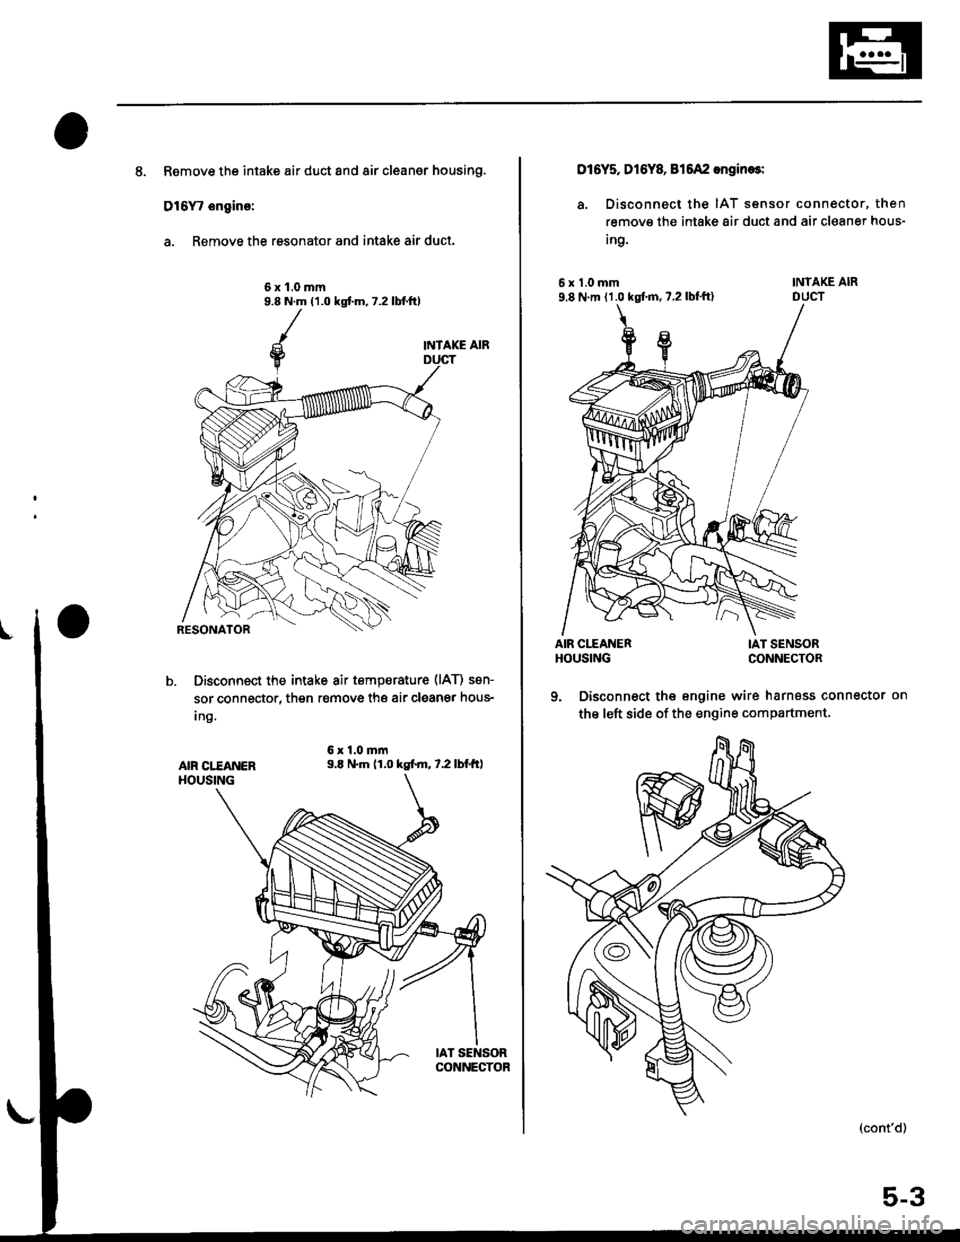 HONDA CIVIC 1996 6.G Workshop Manual 8. Remove the intake air duct and air cleaner housing.
D16Y, ongino:
a. Remove the resonator and intake air duct.
6x1.0mm9.8 N.m (1.0 kgt m, 7.2 lbf.tt)
INTAKE AIR
Disconnect the intake air tempsratur